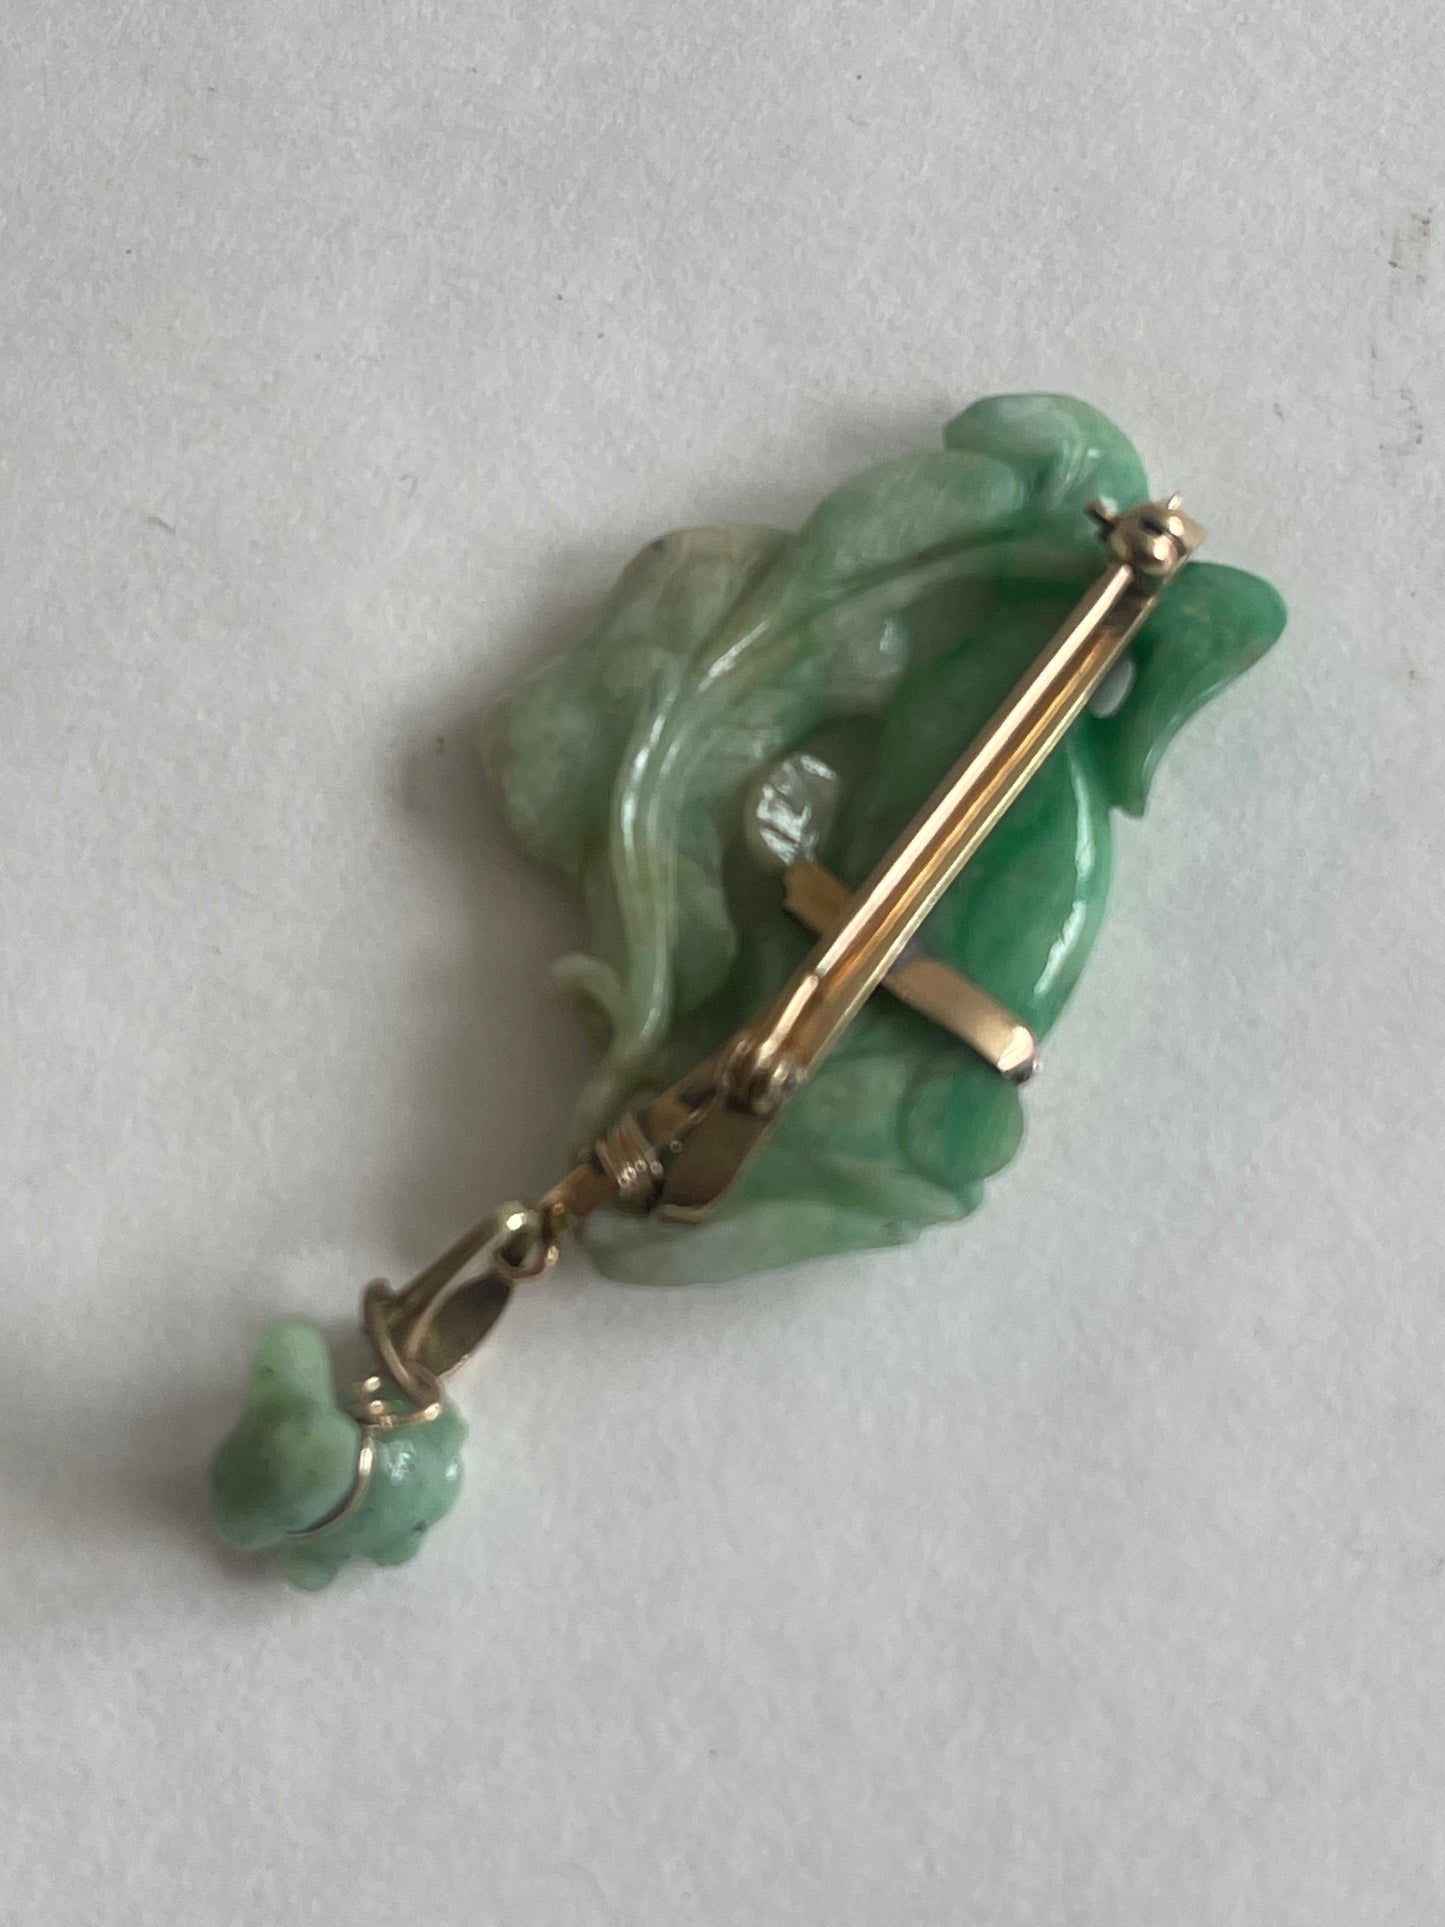 A vintage jade brooch in a 10 kt gold setting